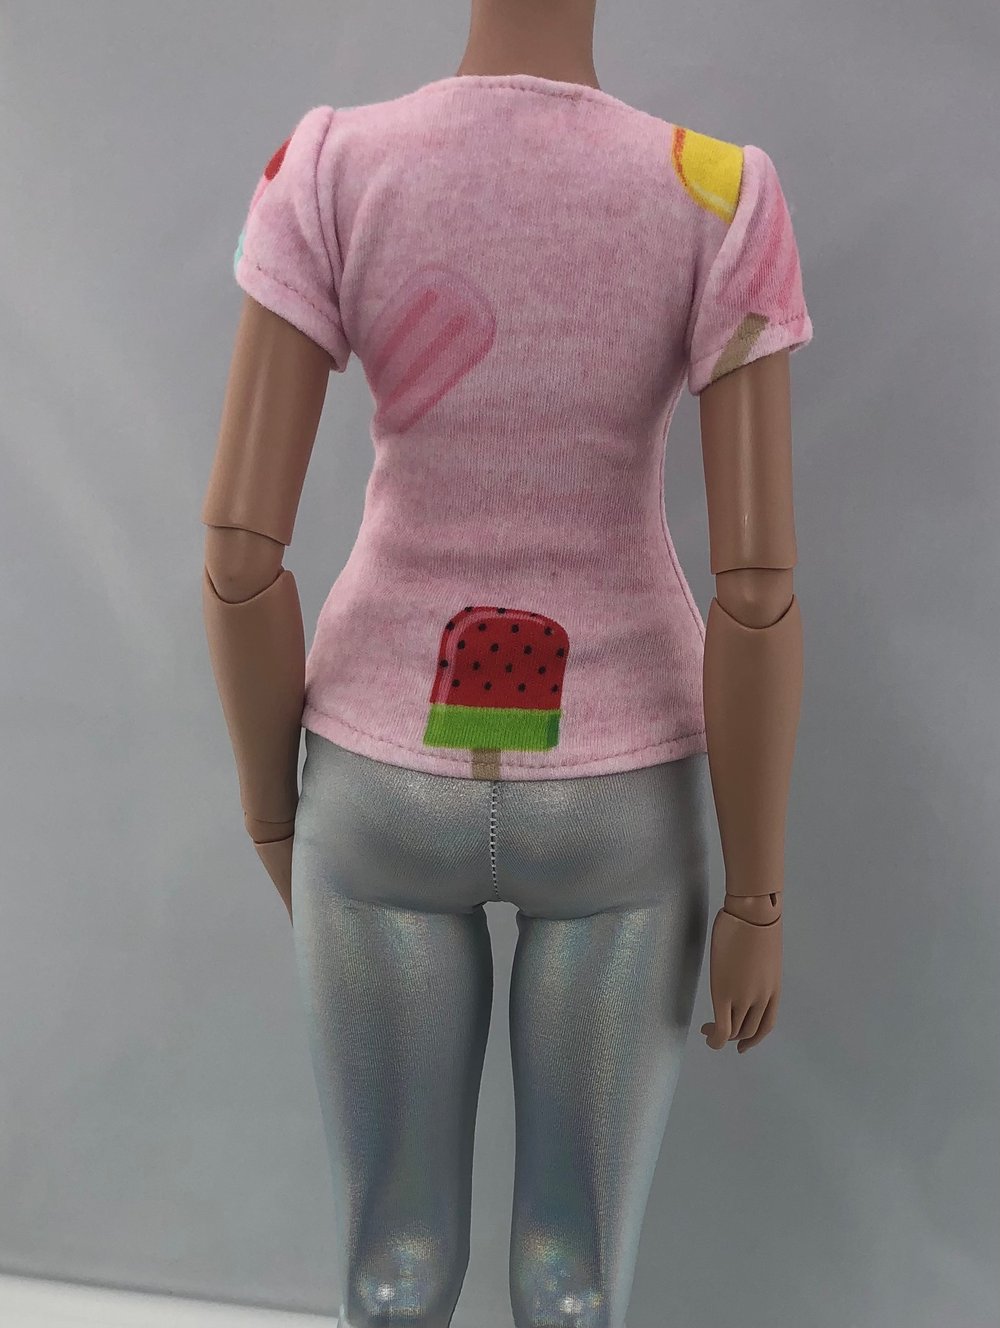 Pink Popsicles Shirt: Feeple60  